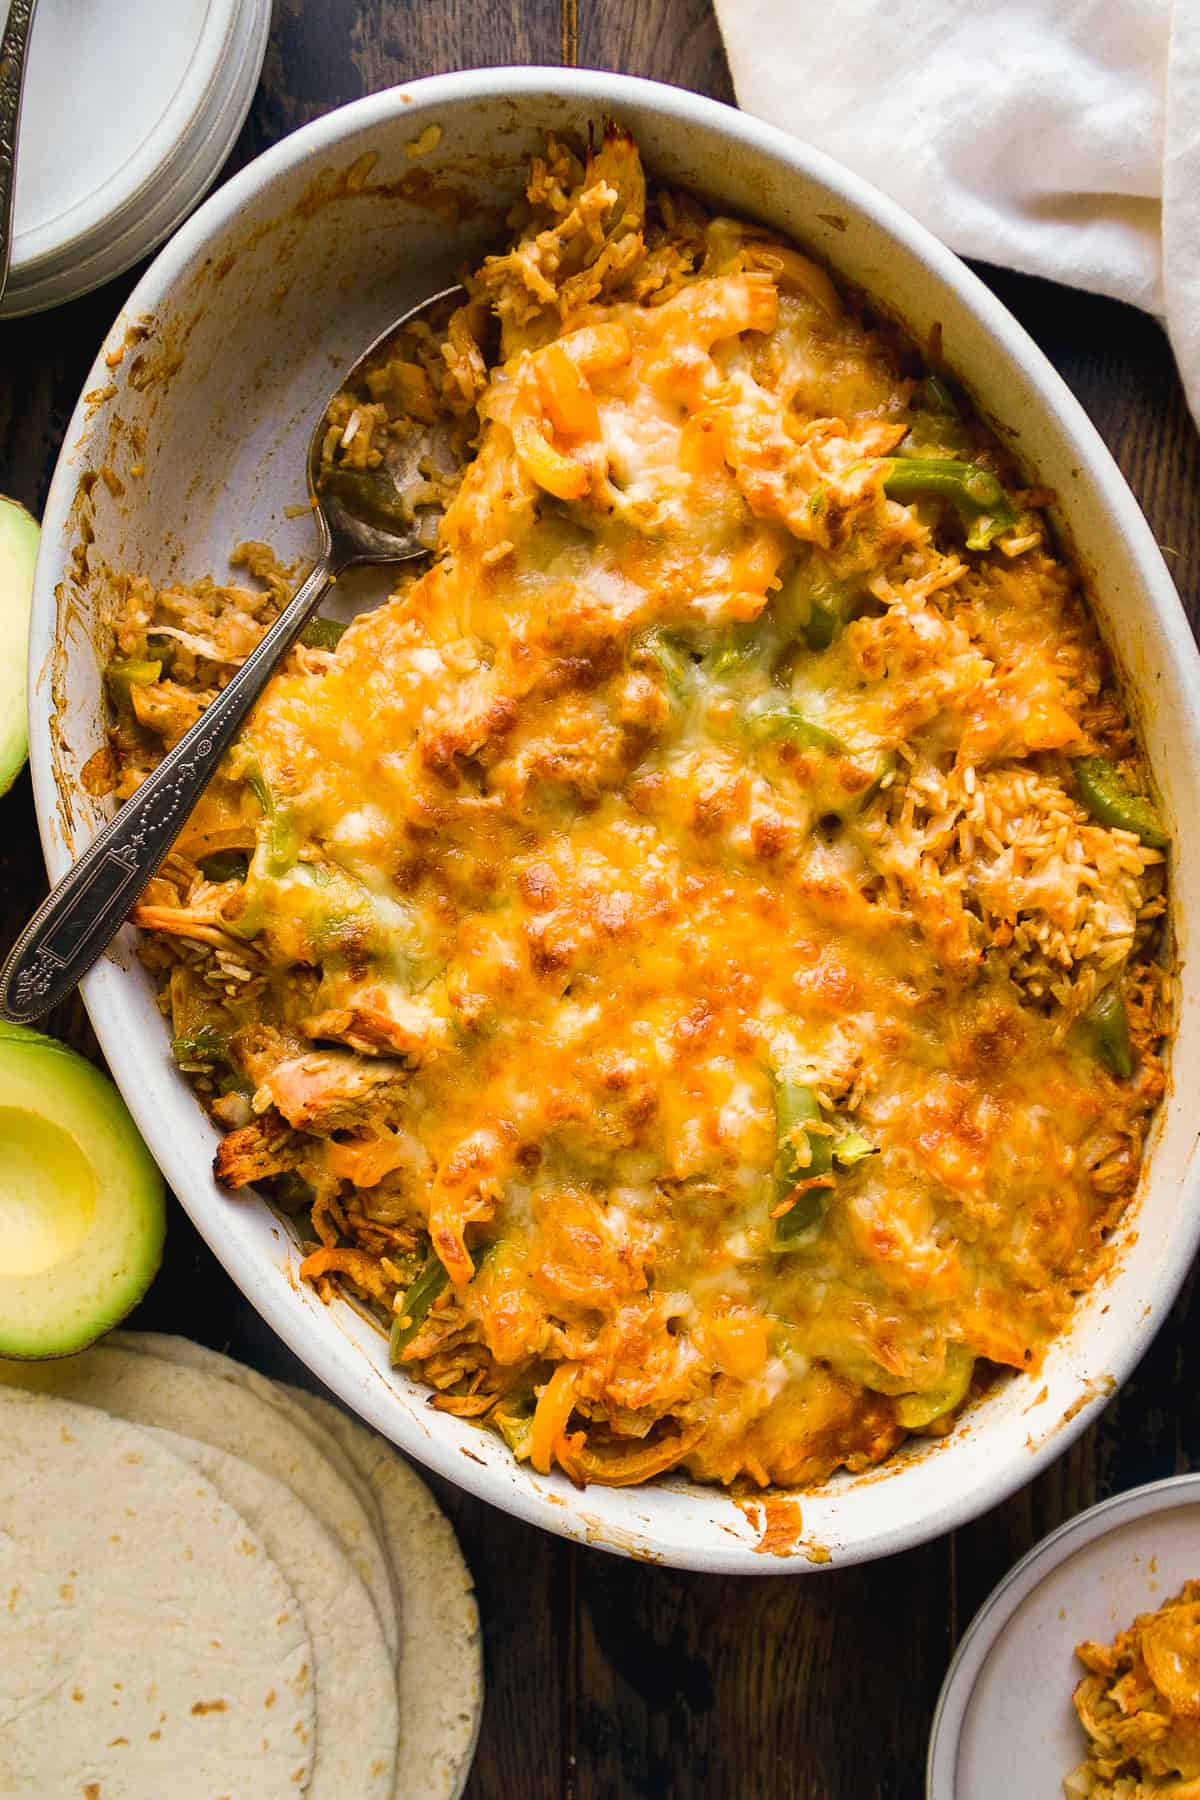 Fajita casserole with chicken and rice in an oval dish.